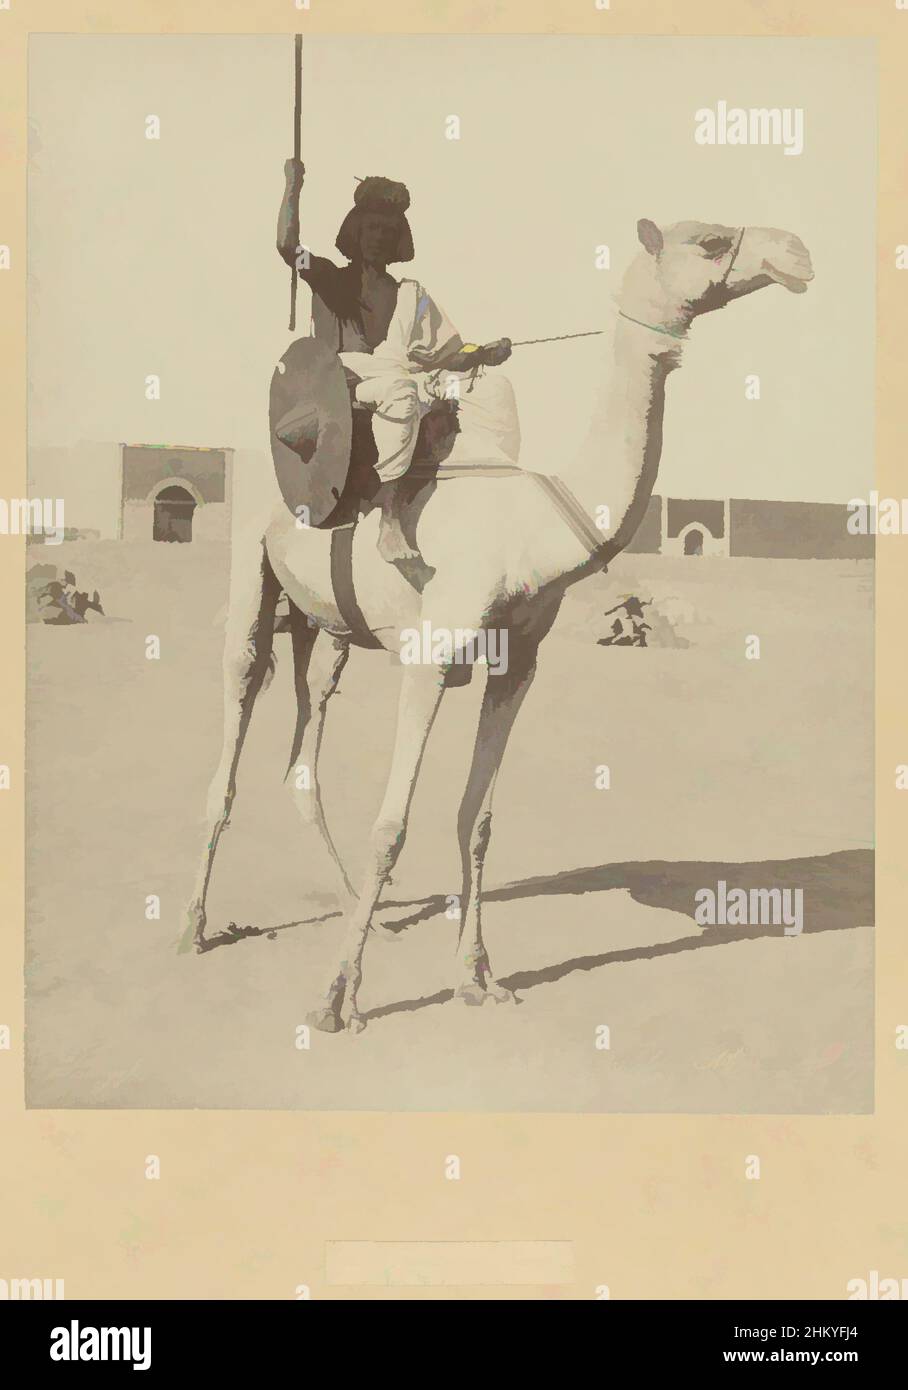 Art inspired by A Besharin man on a camel with shield and spear.E 105. Besharin on a camel, No 625 Soldat Abysun a Doga., The photograph is part of the series of photographs from Egypt collected by Richard Polak., C. & G. Zangaki, Egypte, c. 1895 - c. 1915, photographic support, paper, Classic works modernized by Artotop with a splash of modernity. Shapes, color and value, eye-catching visual impact on art. Emotions through freedom of artworks in a contemporary way. A timeless message pursuing a wildly creative new direction. Artists turning to the digital medium and creating the Artotop NFT Stock Photo